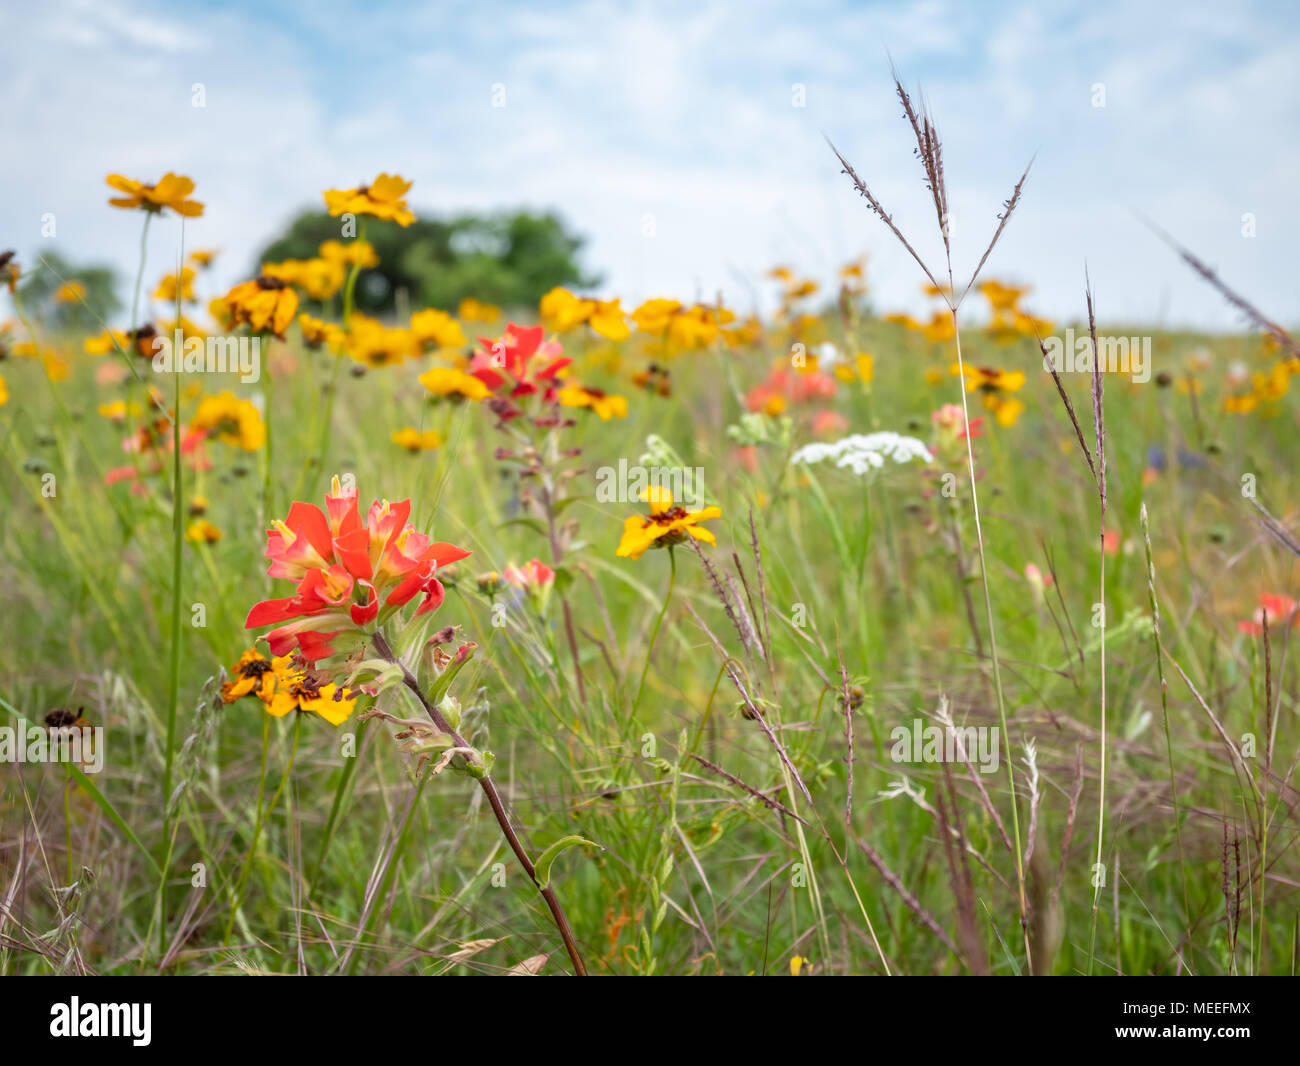 View of Various Colorful Wild Flowers with Tall Green Grass with Cloudy Blue Skies in the Background Stock Photo